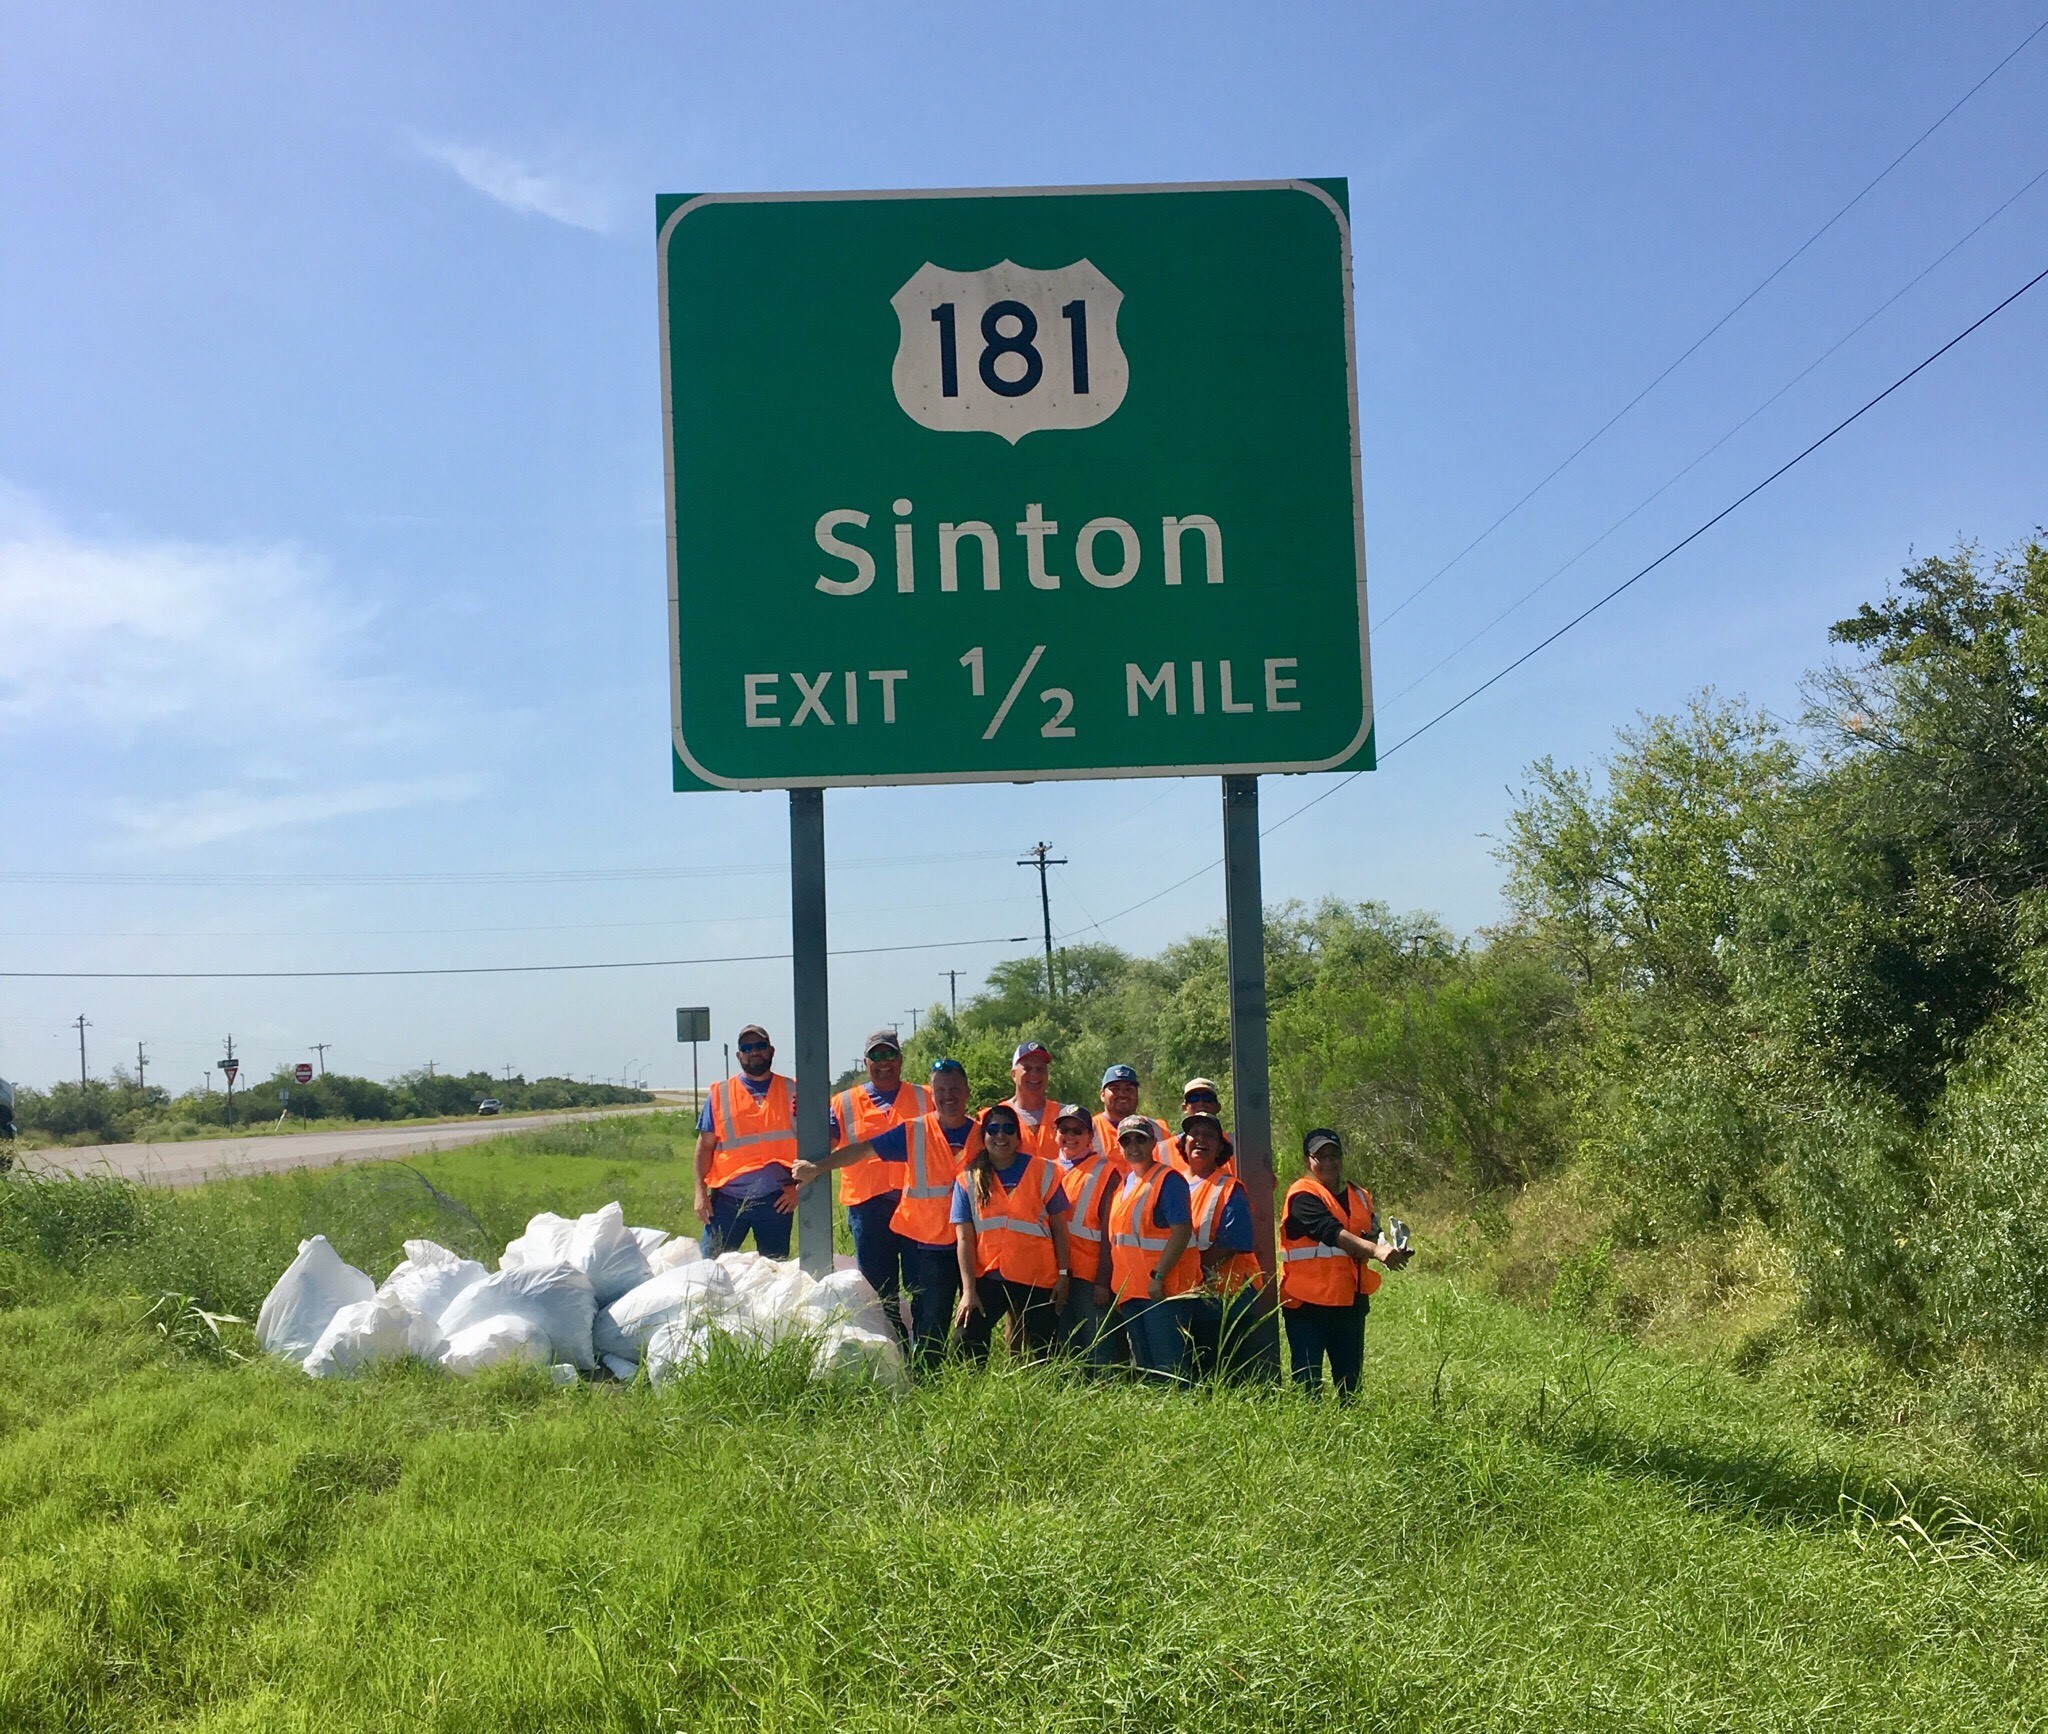 SPEC Employees posing next to sign and trash collected at Adopt-A-Highway